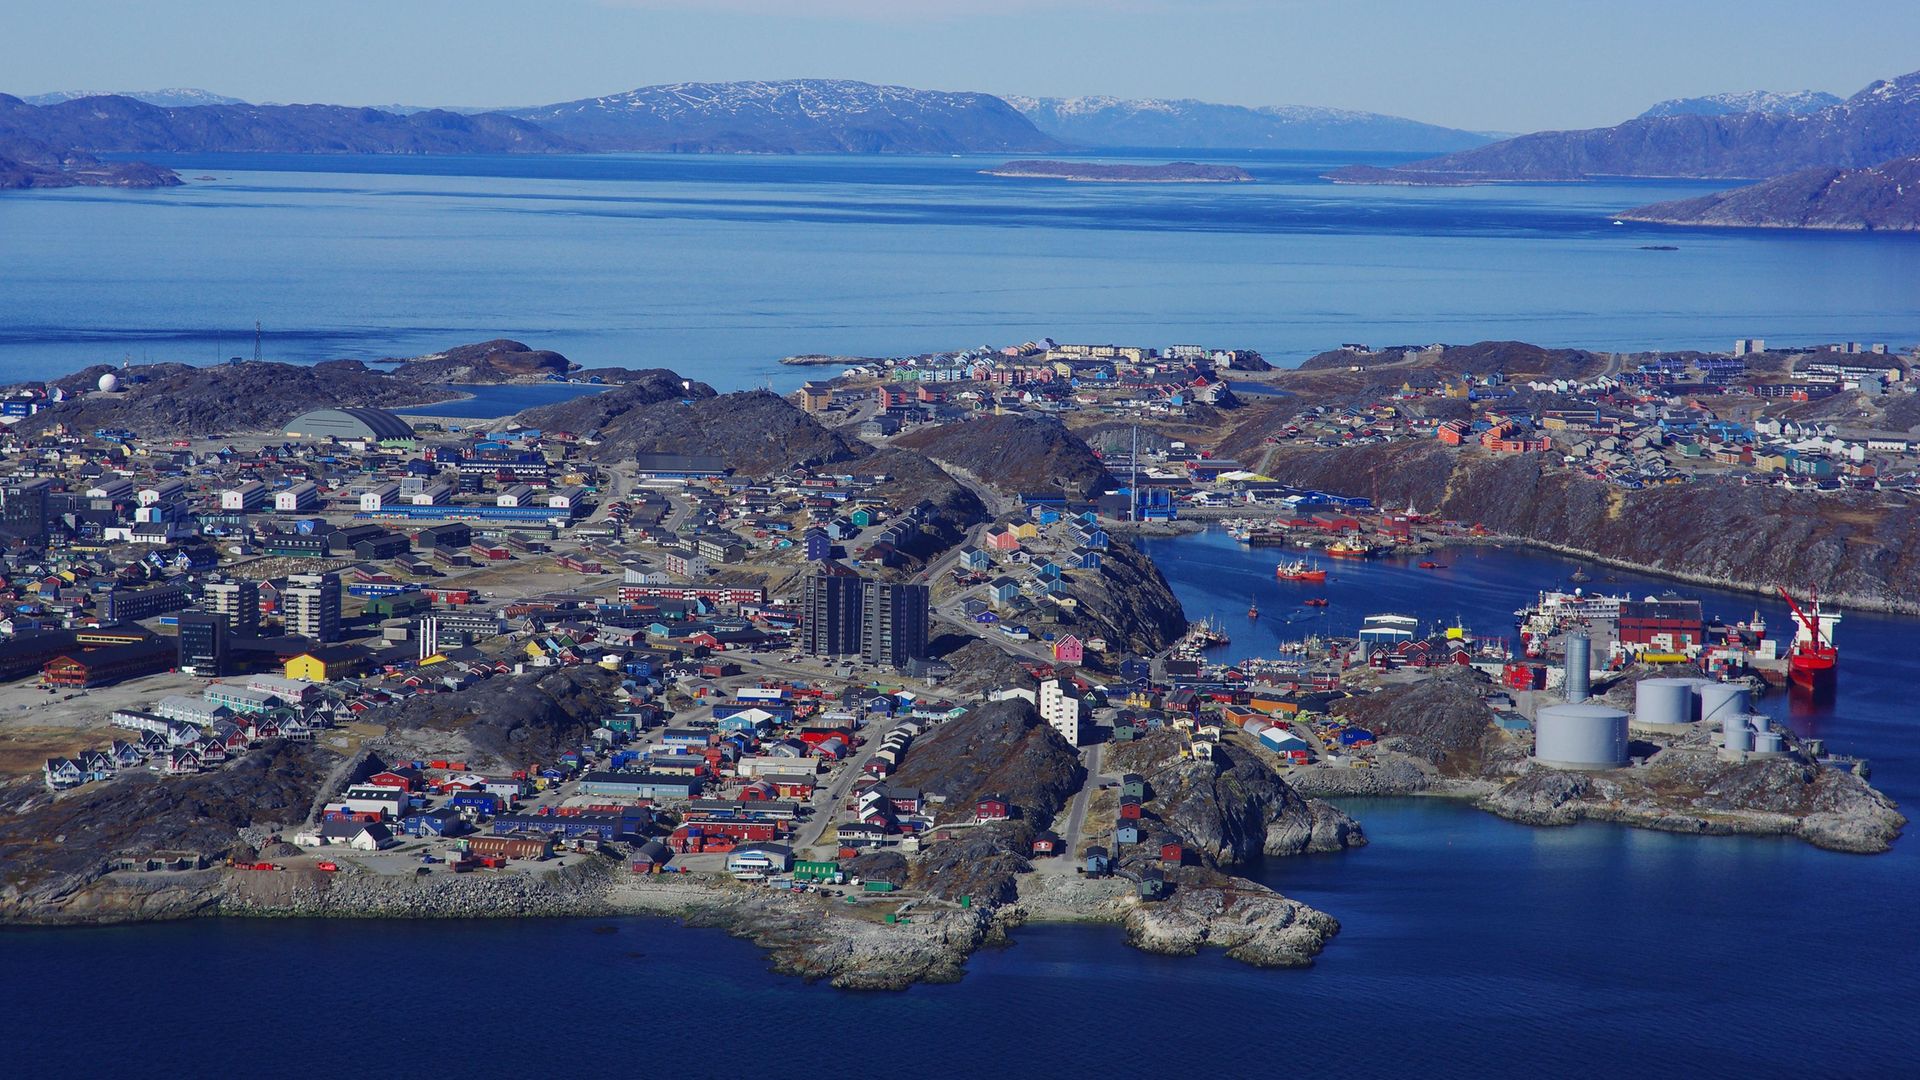 An aerial view of Nuuk, capital of Greenland - Credit: Gamma-Rapho via Getty Images